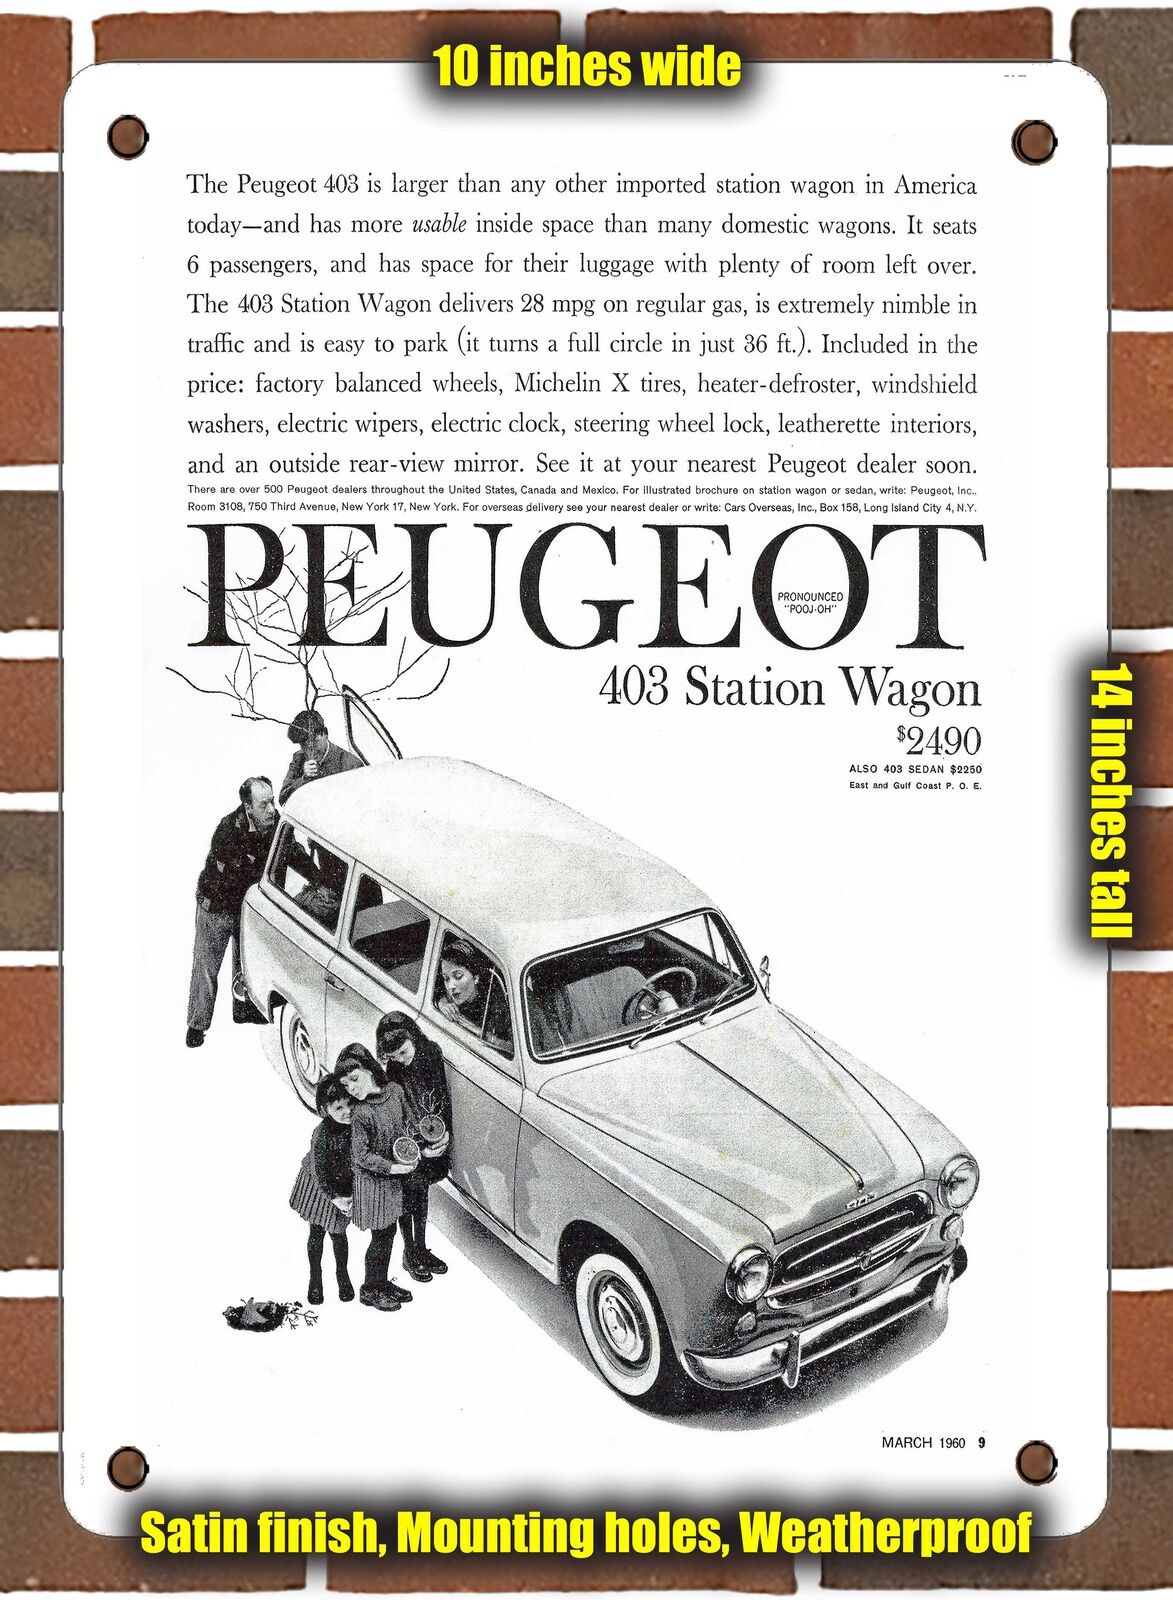 METAL SIGN - 1960 Peugeot 403 Station Wagon - 10x14 Inches